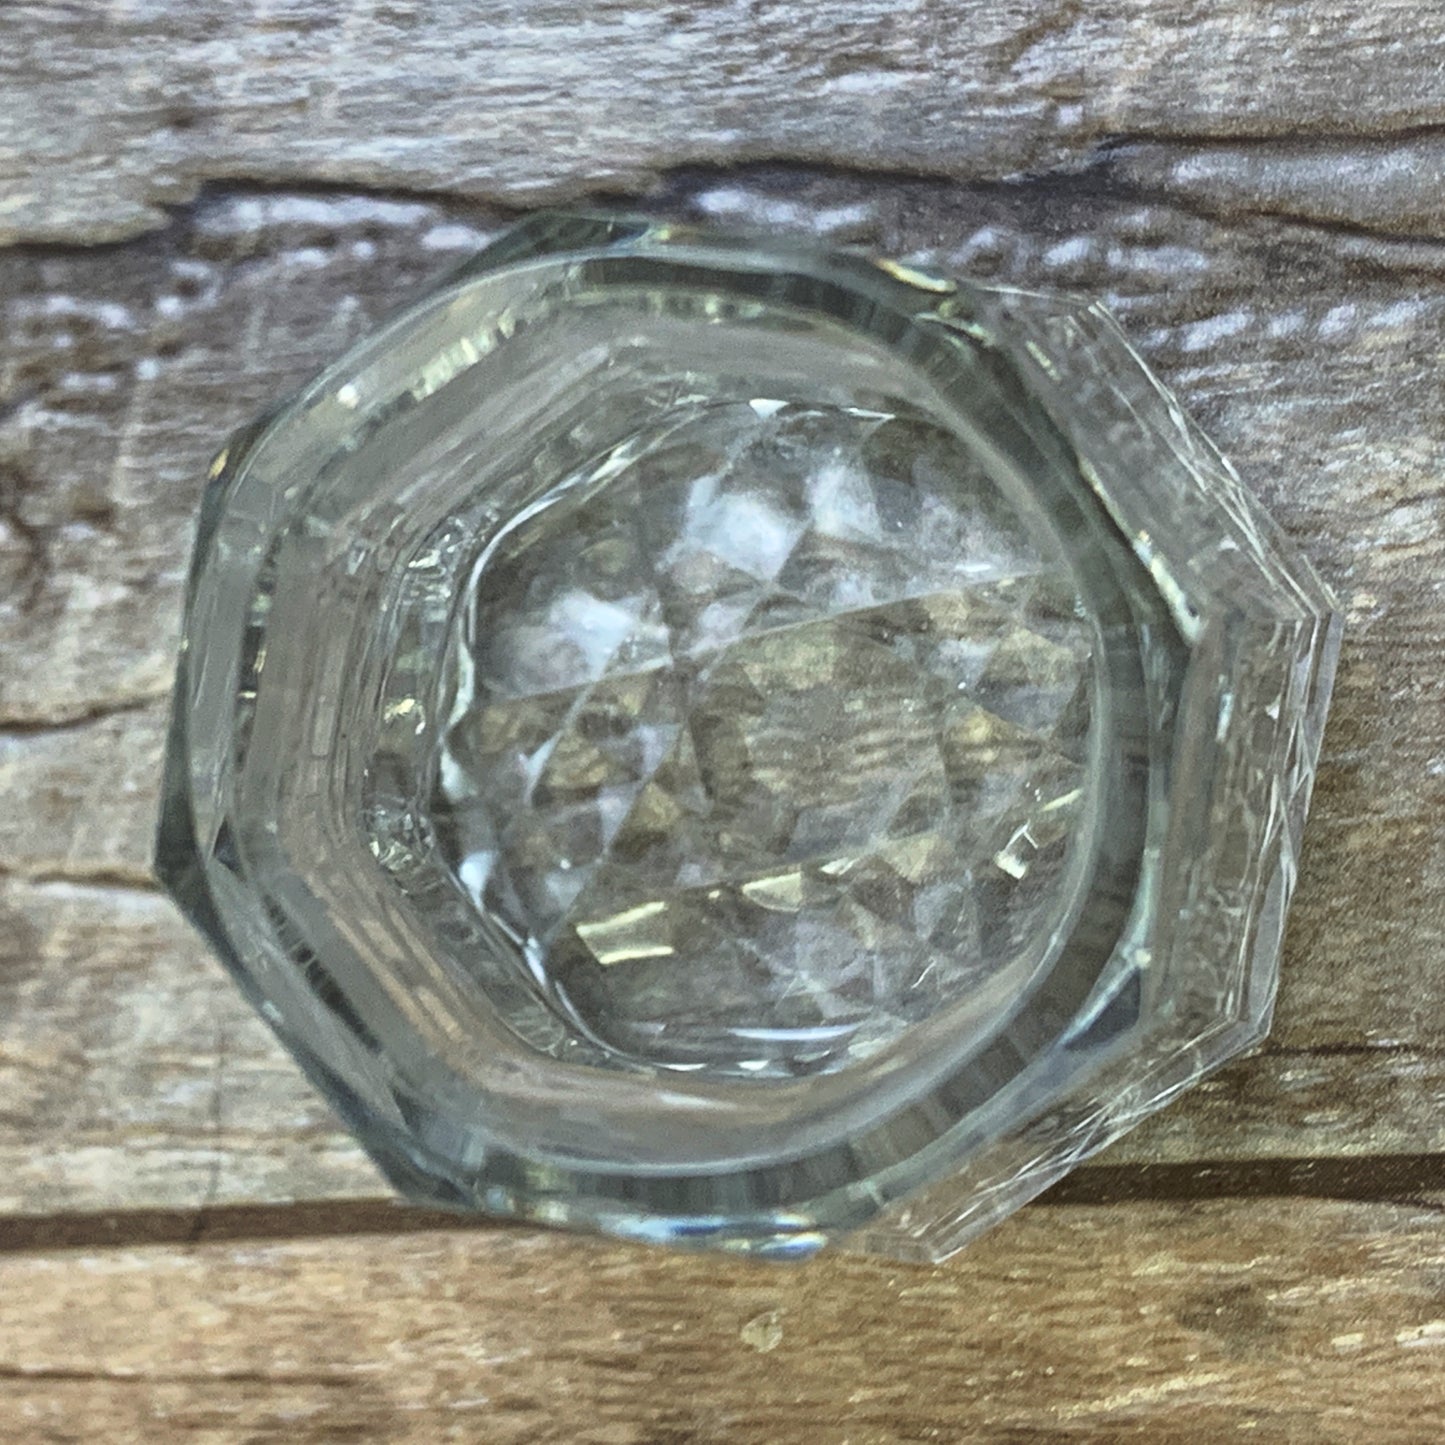 Vintage Glass Octagon-Shaped Toothpick Holder with Patterned Base